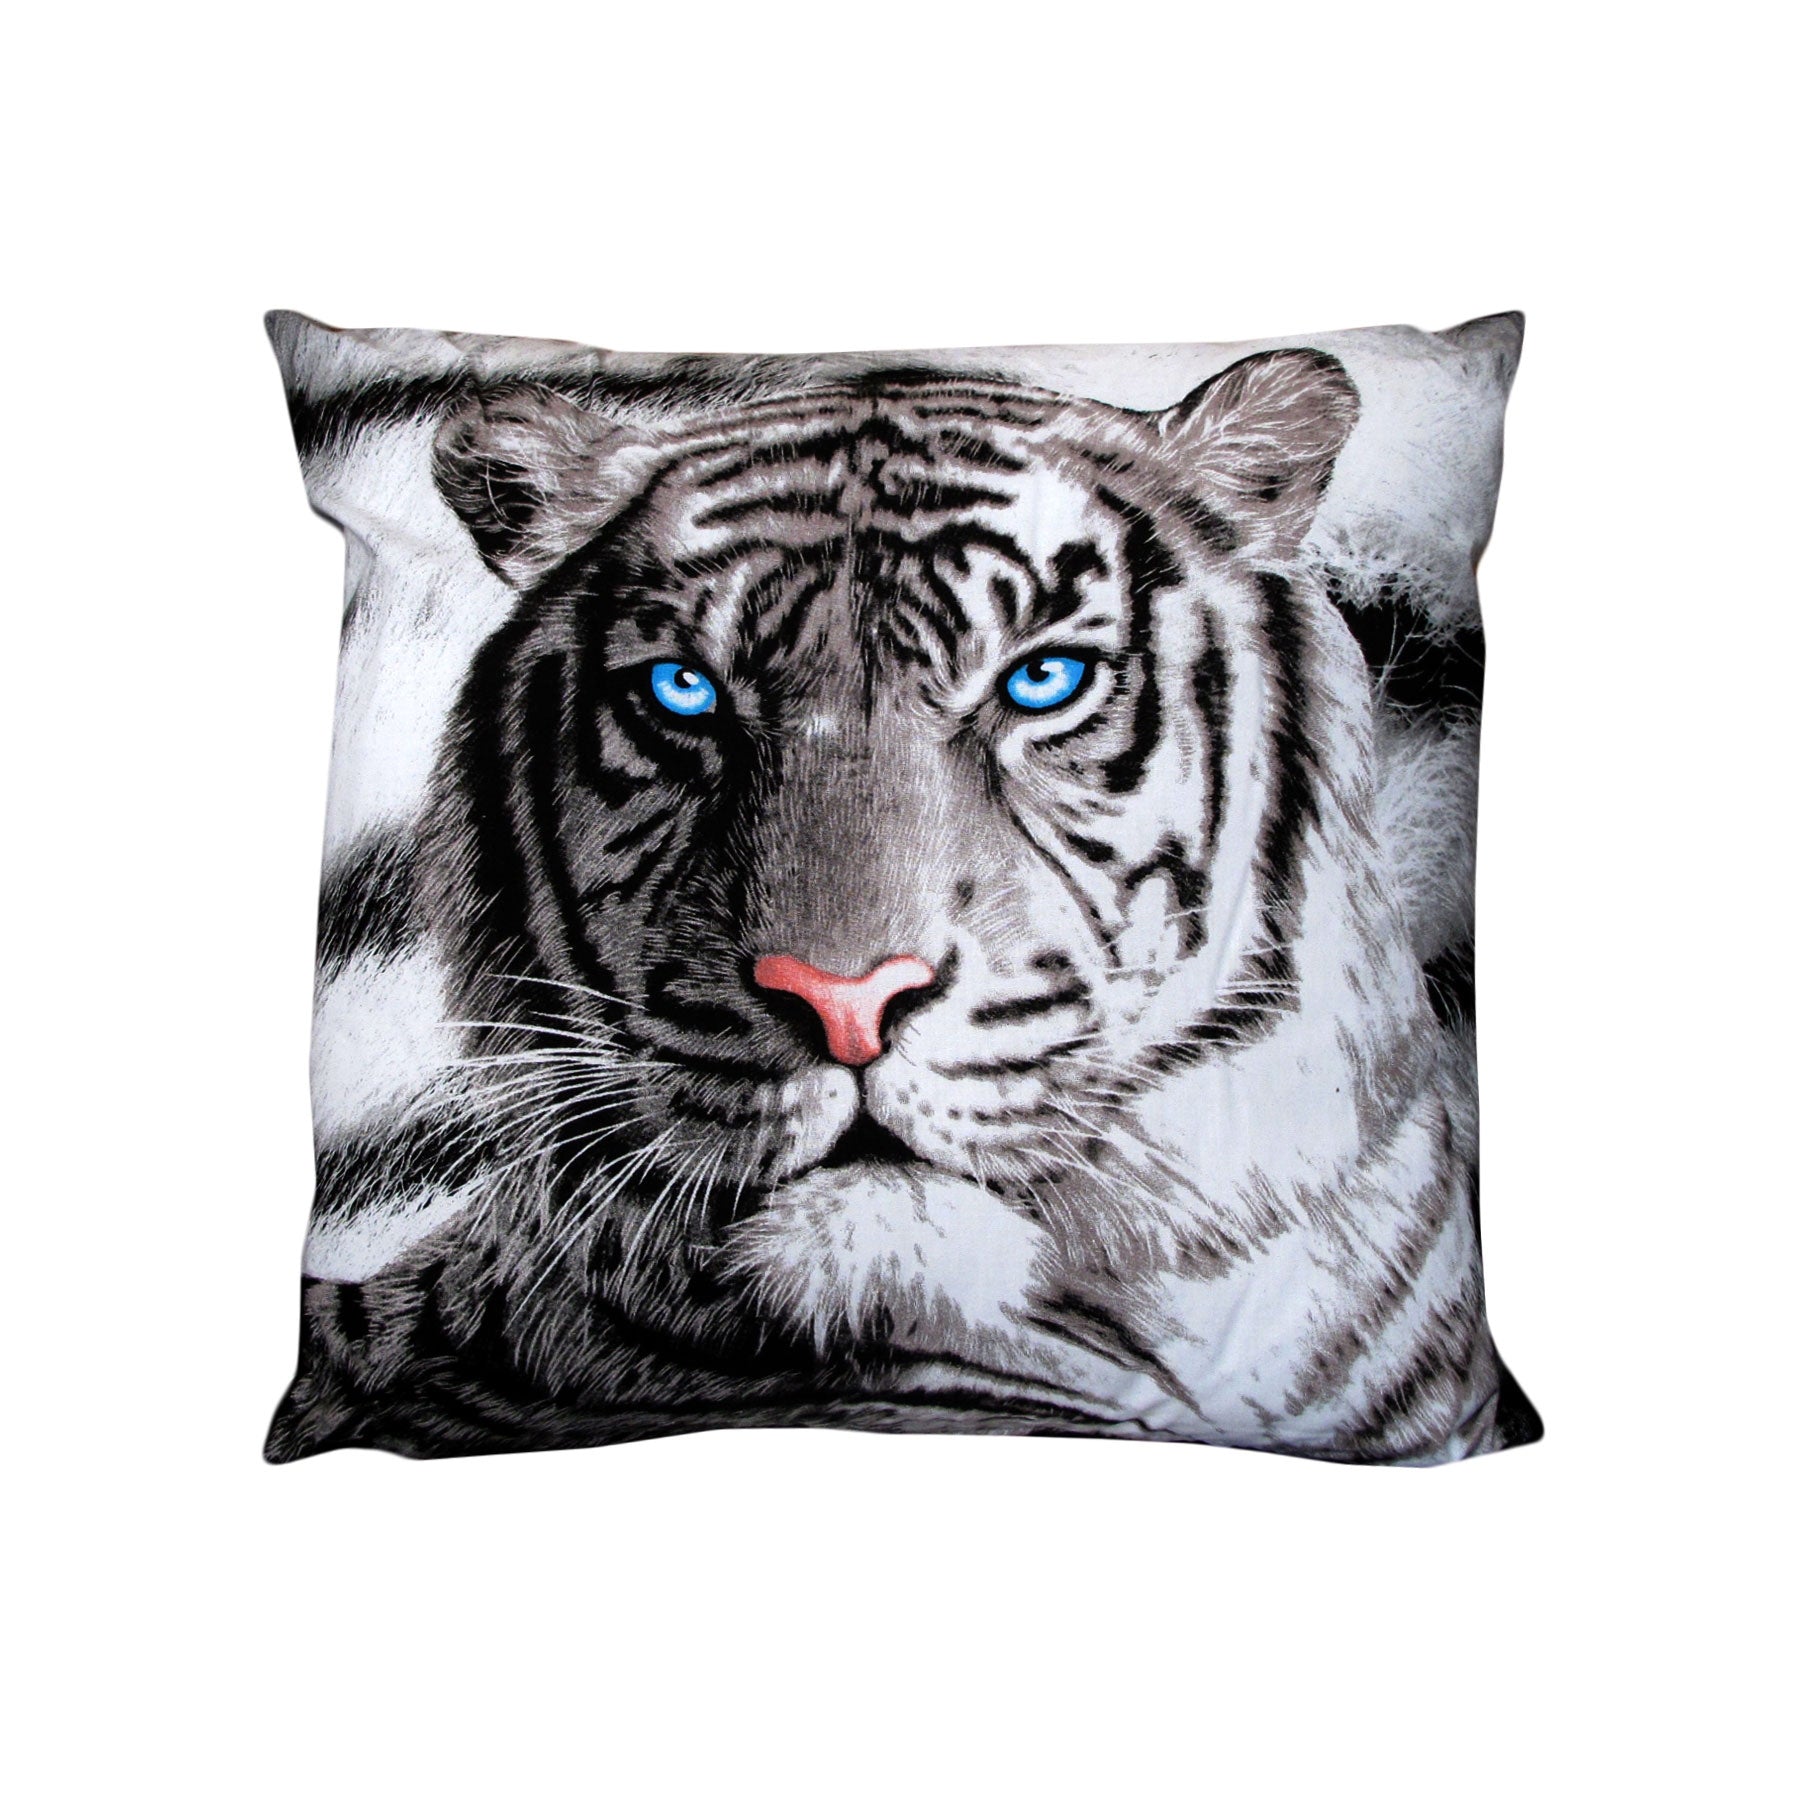 Image of a white and black striped tigers face with piercing blue eyes and pink nose on a cushion.